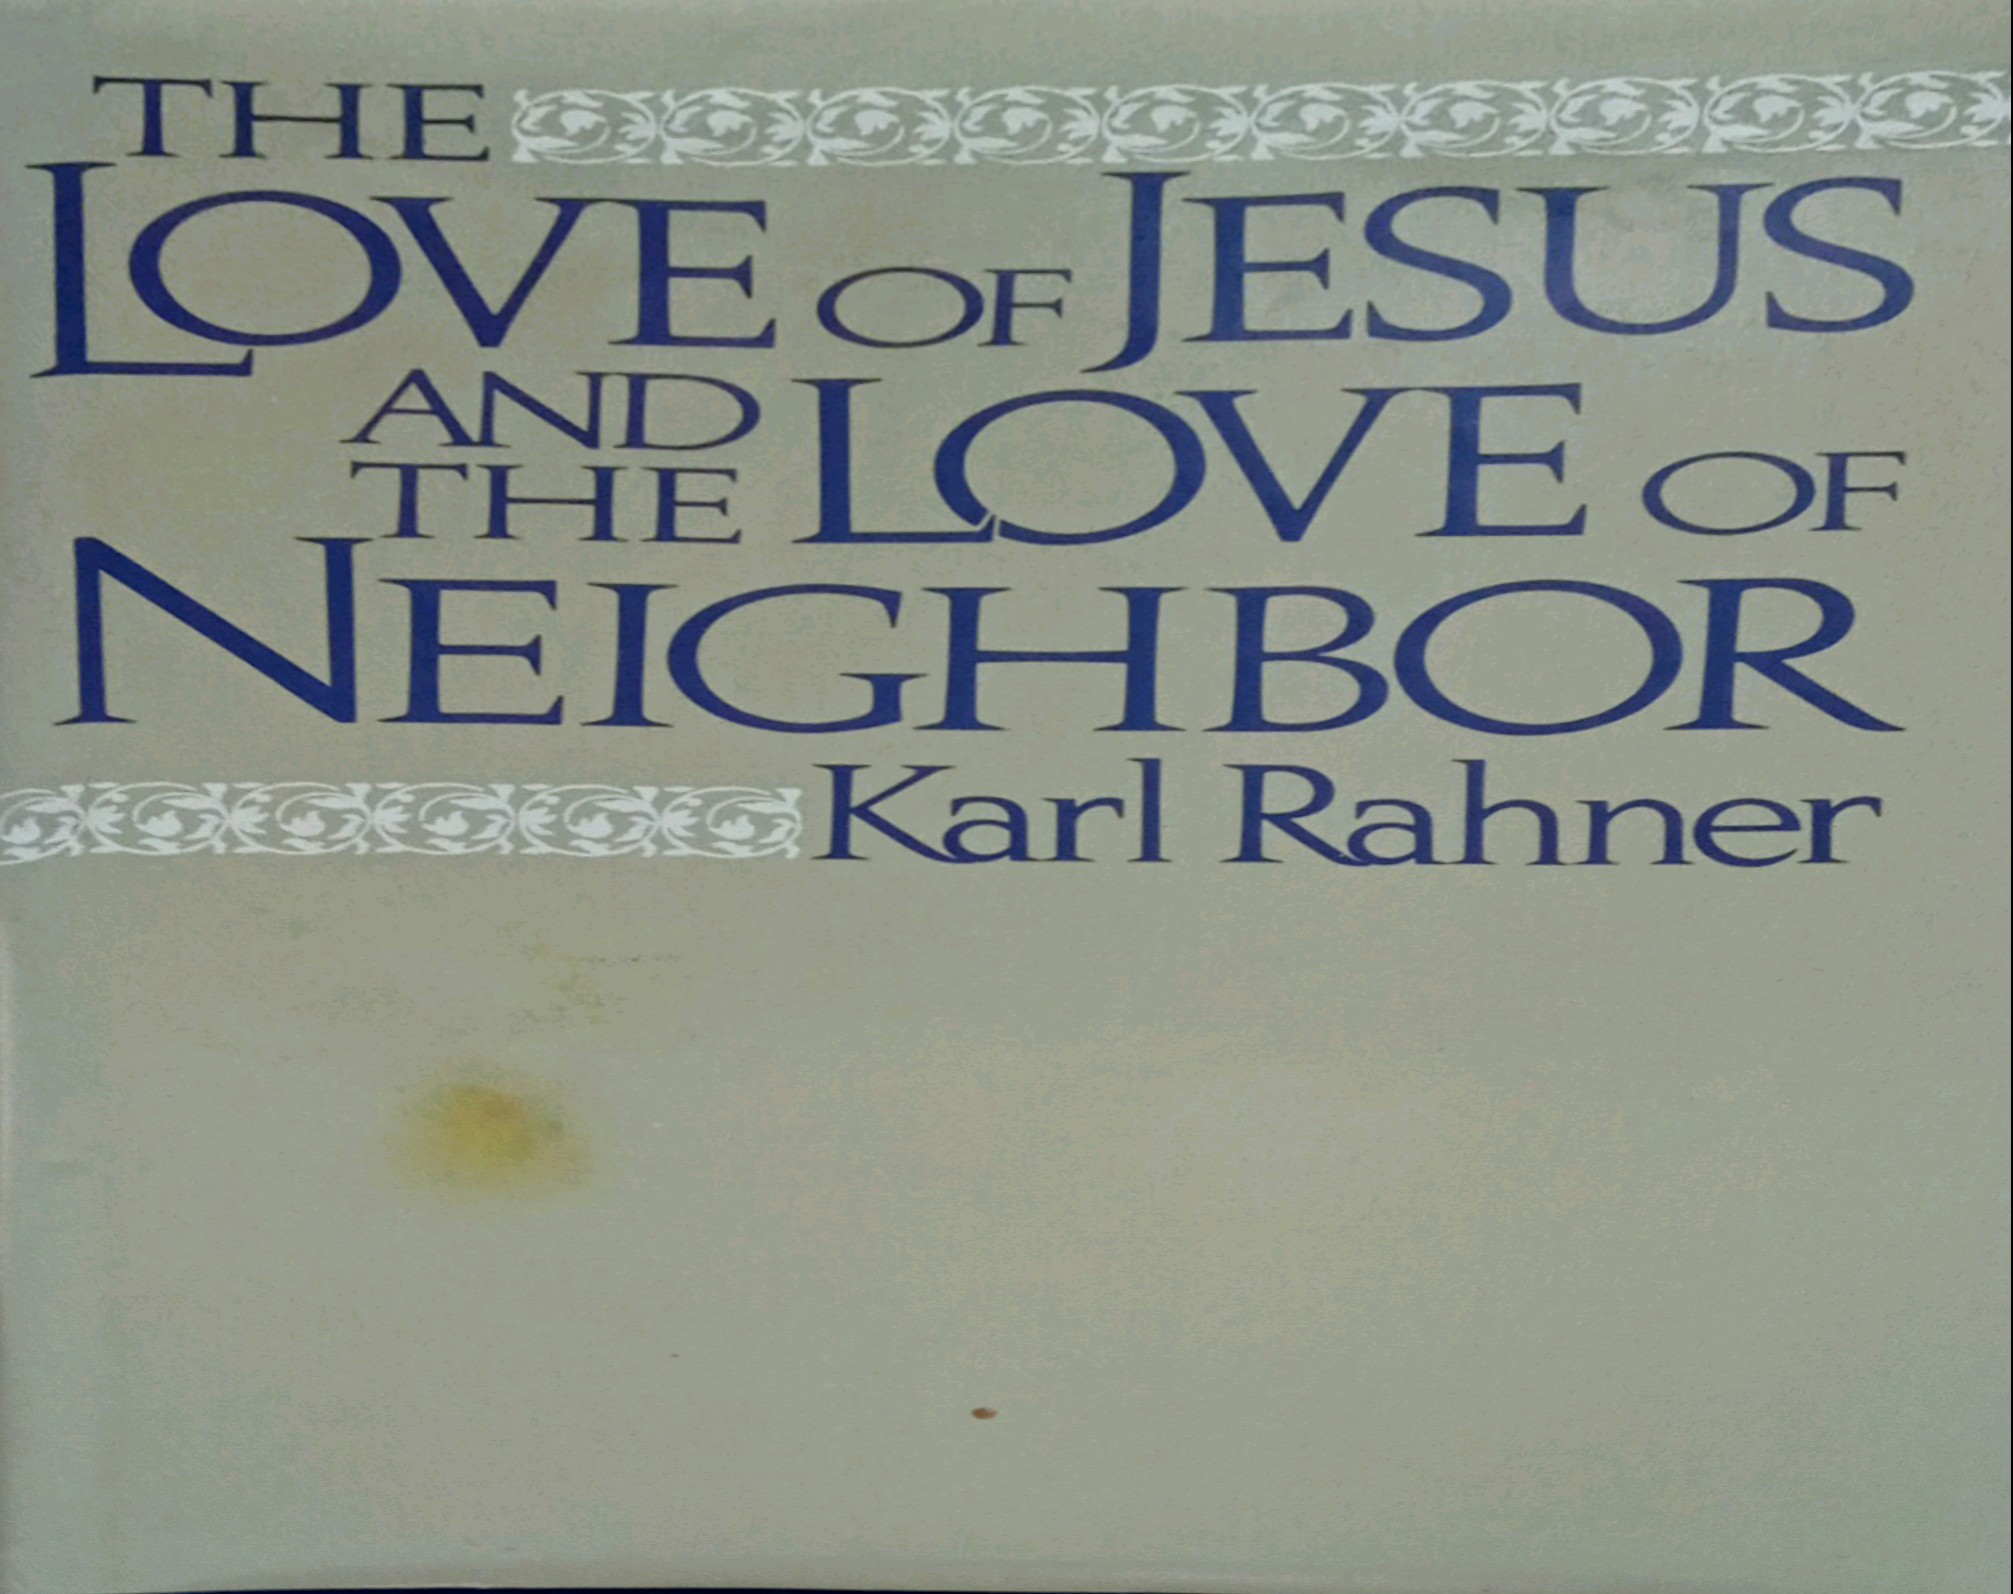 THE LOVE OF JESUS AND THE LOVE OF NEIGHBOR